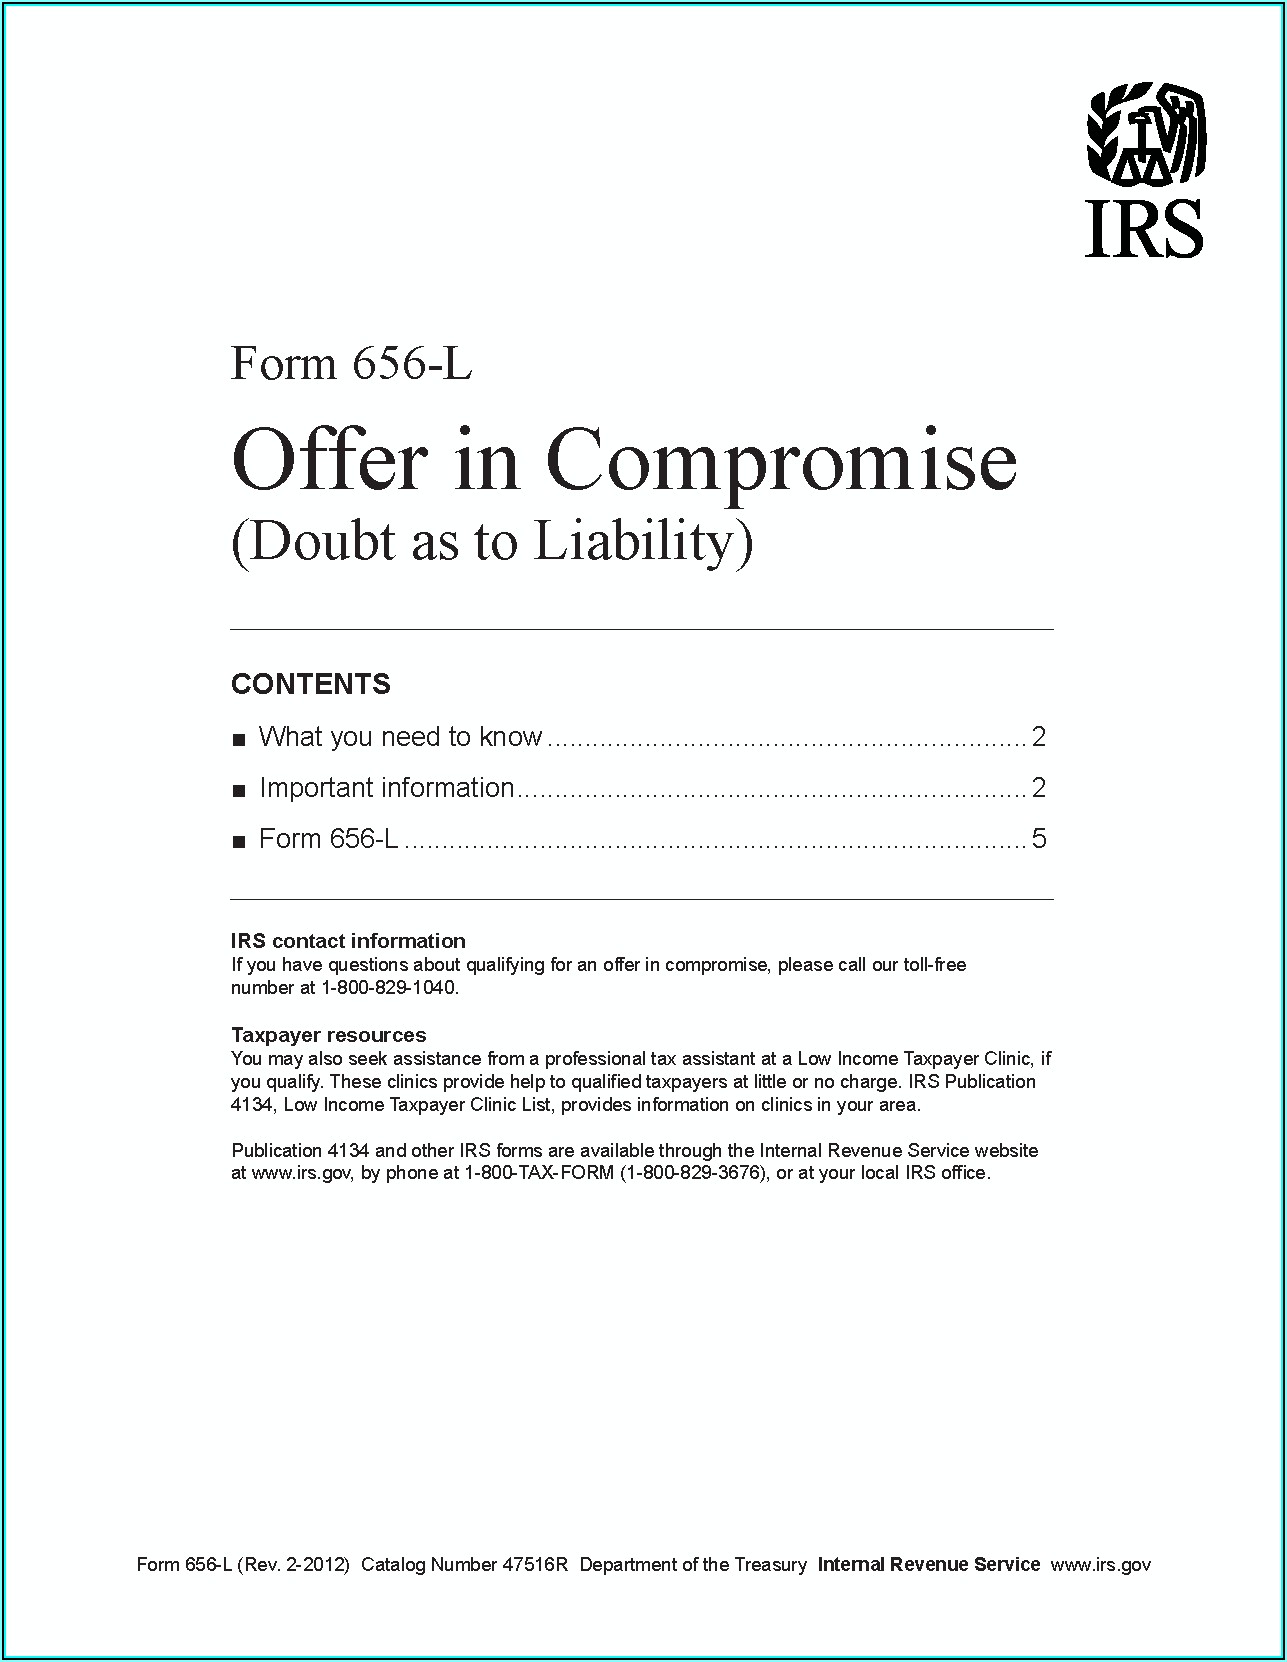 Irs.gov Offer In Compromise Form